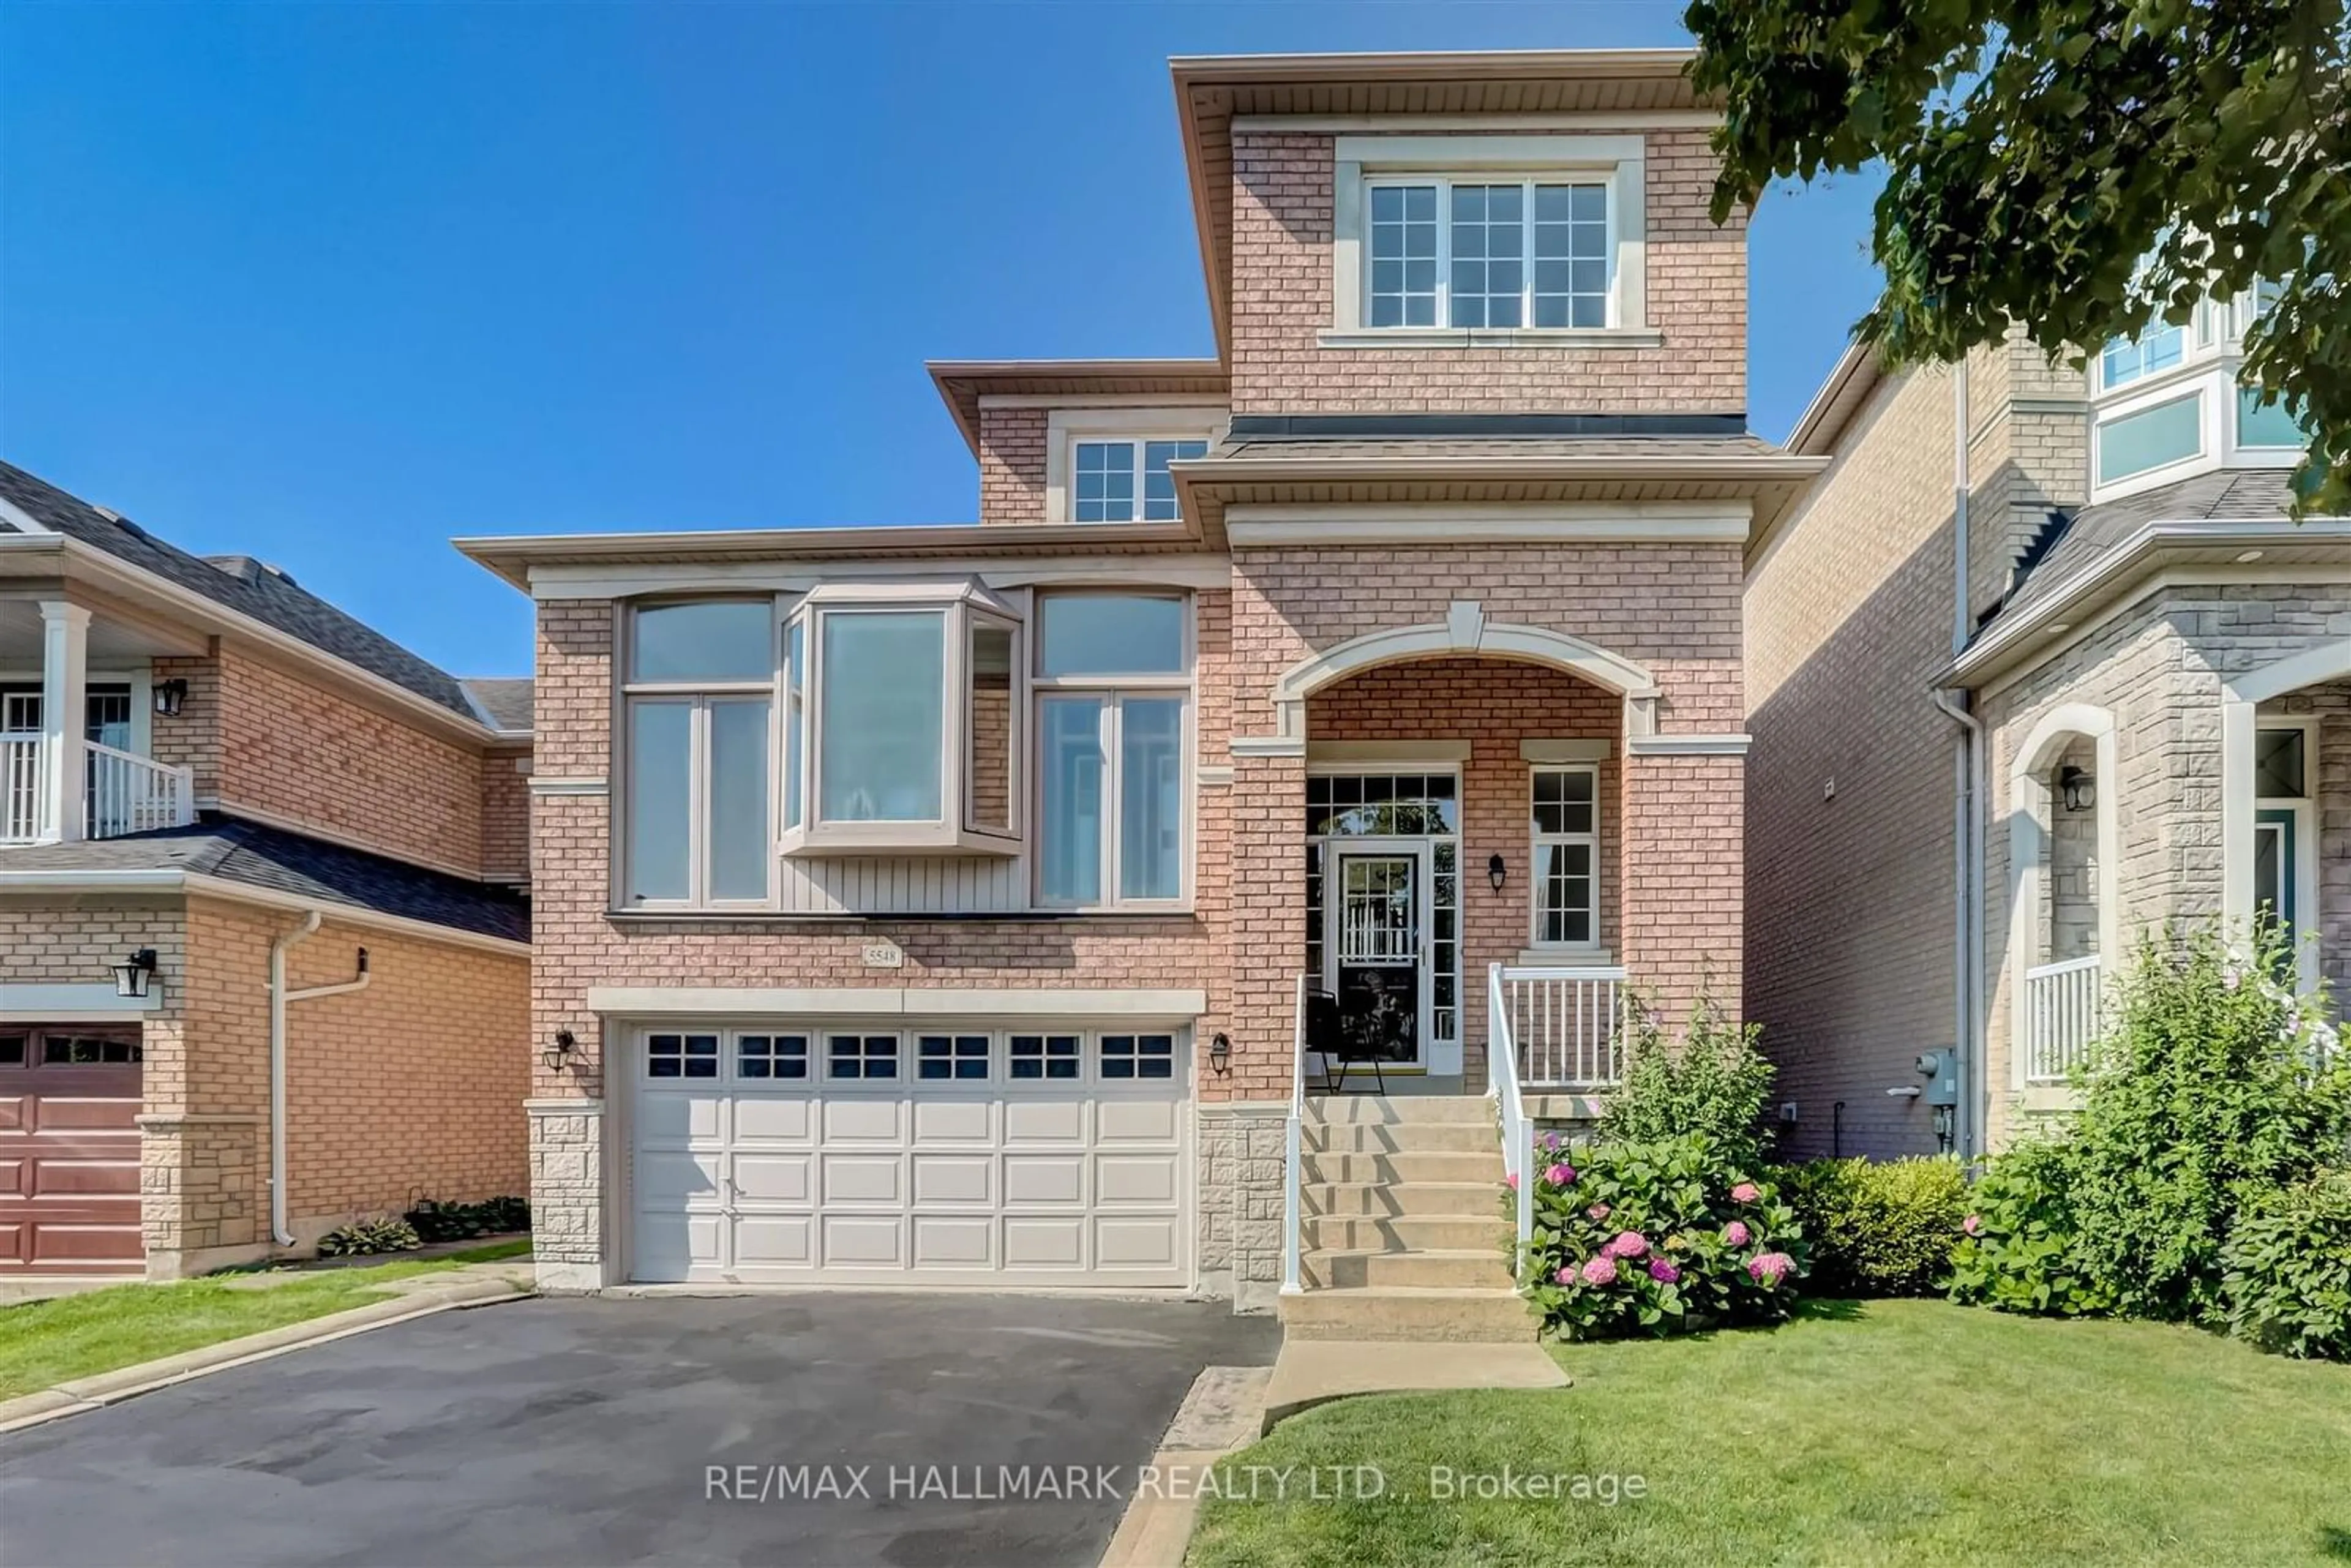 Home with brick exterior material for 5548 Heathcote Walk, Mississauga Ontario L5M 6M7